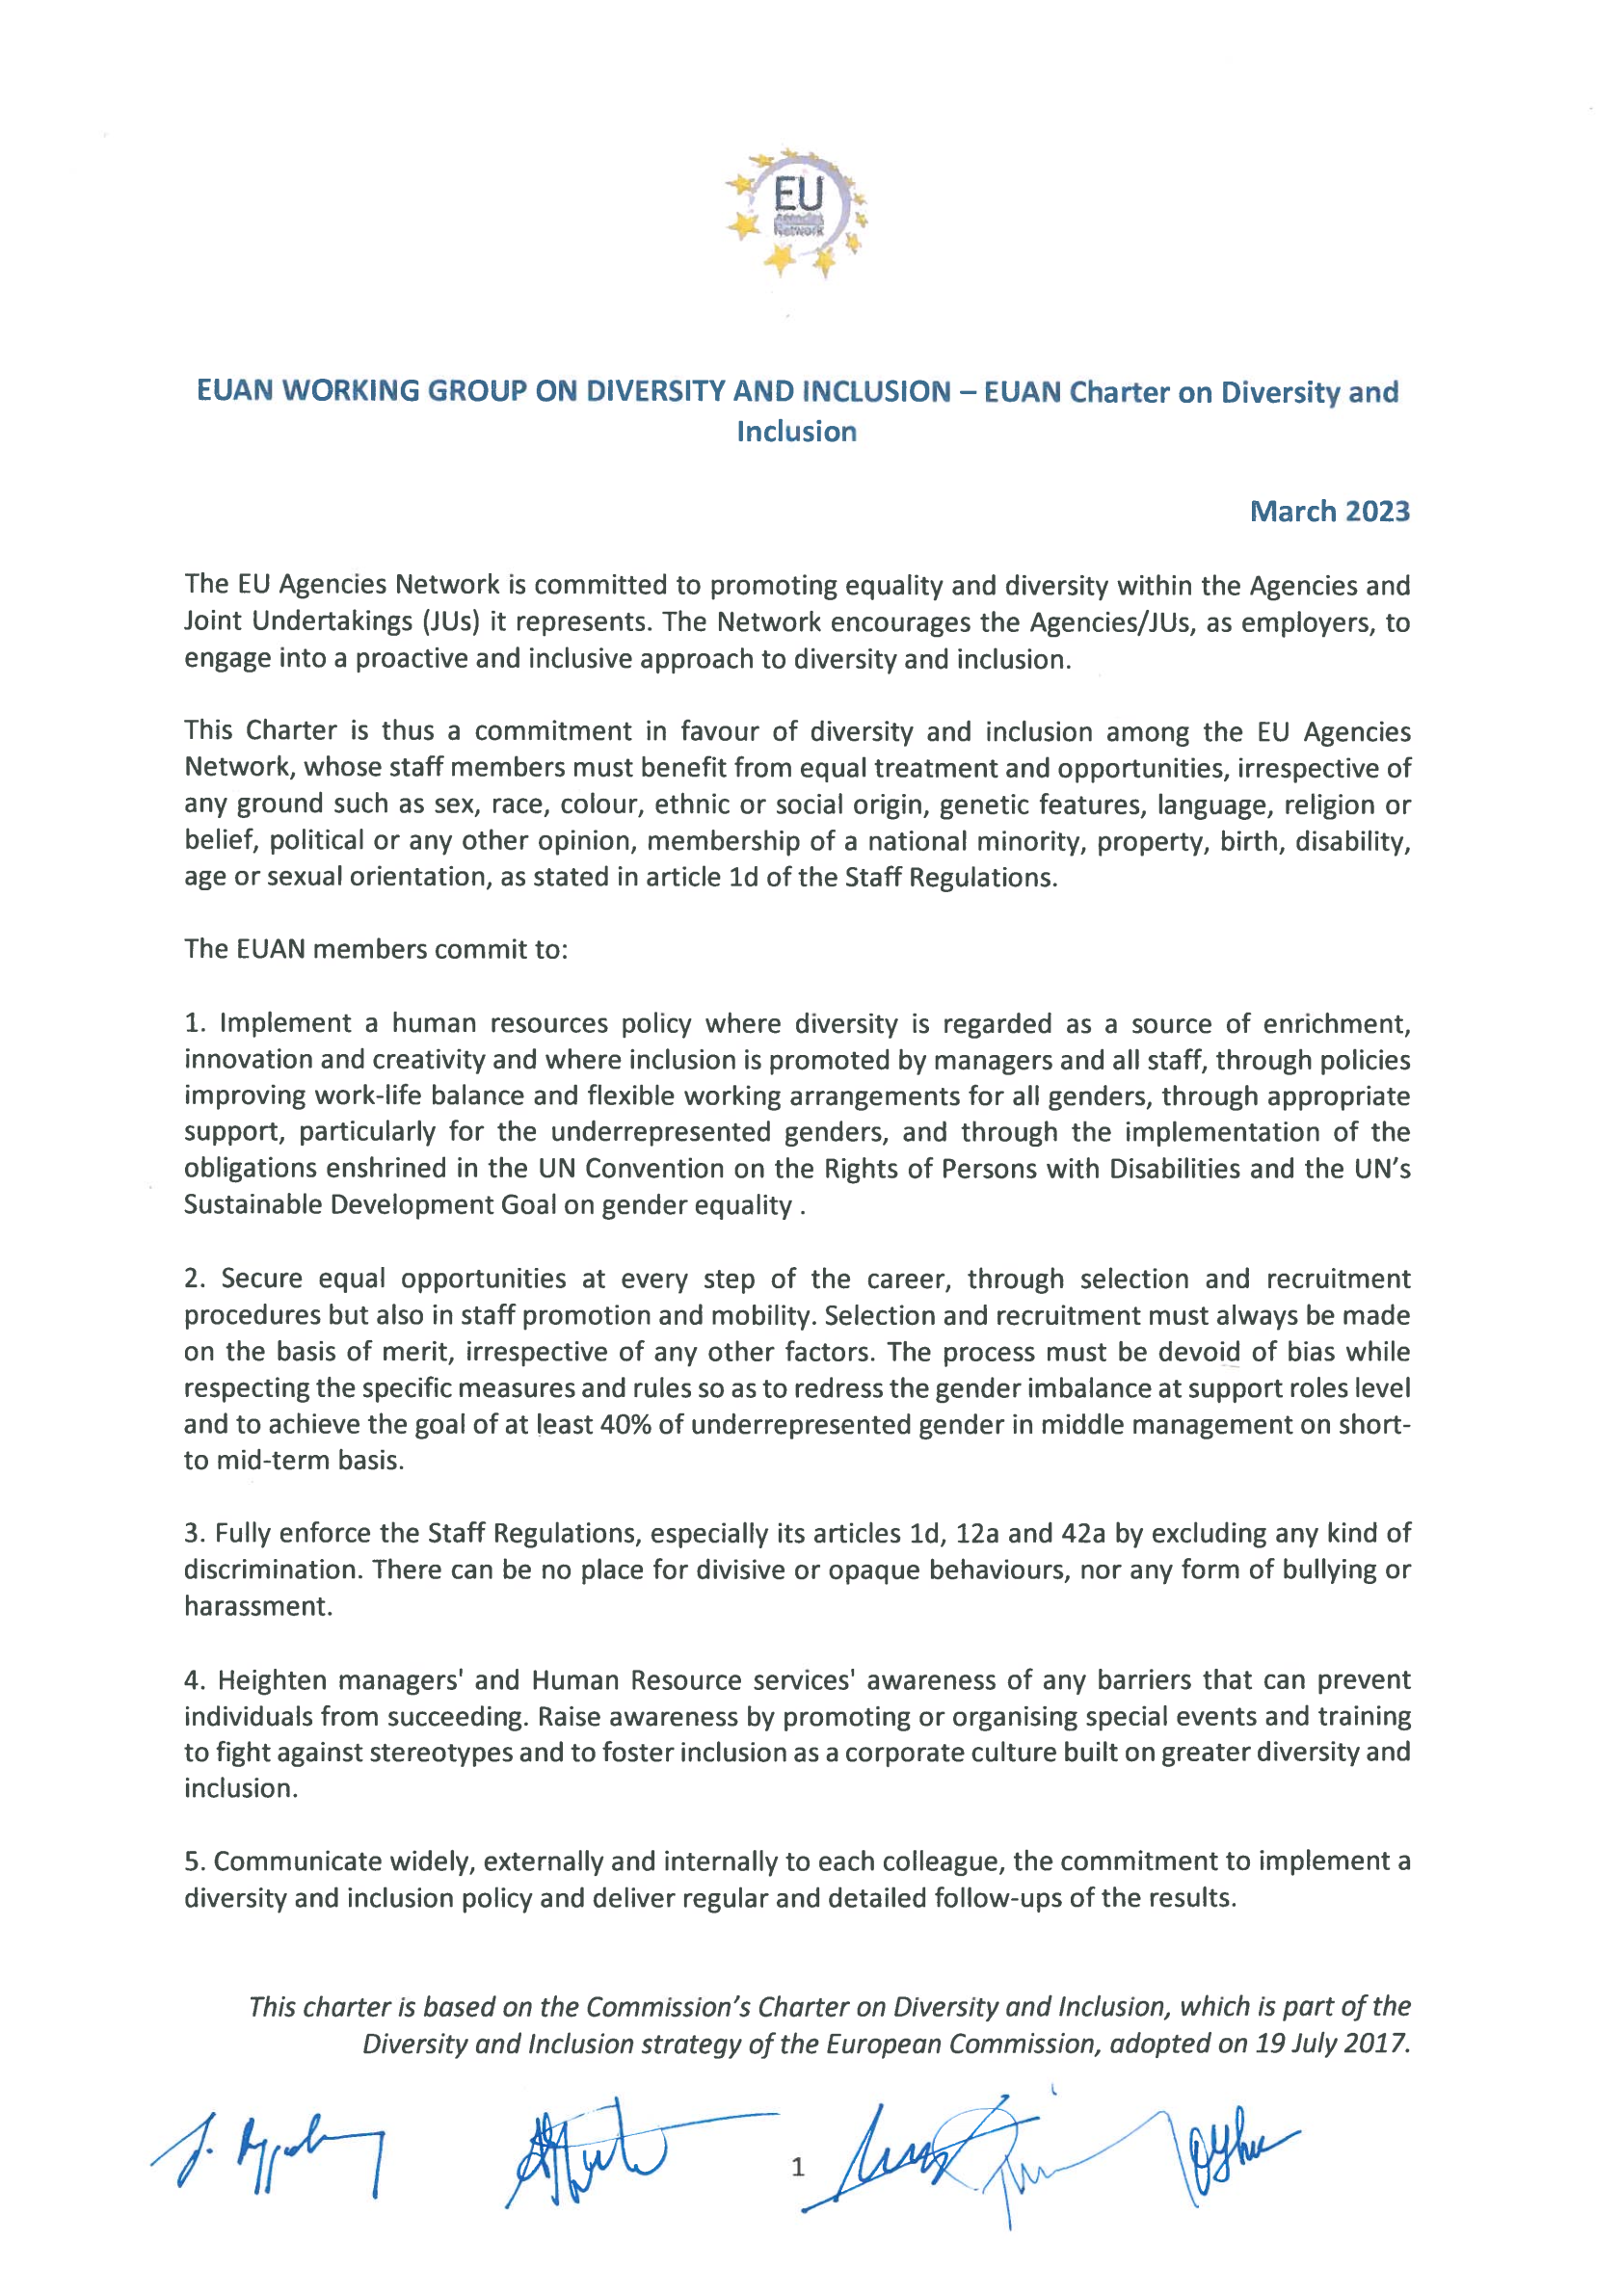 EUAN Diversity and Inclusion charter